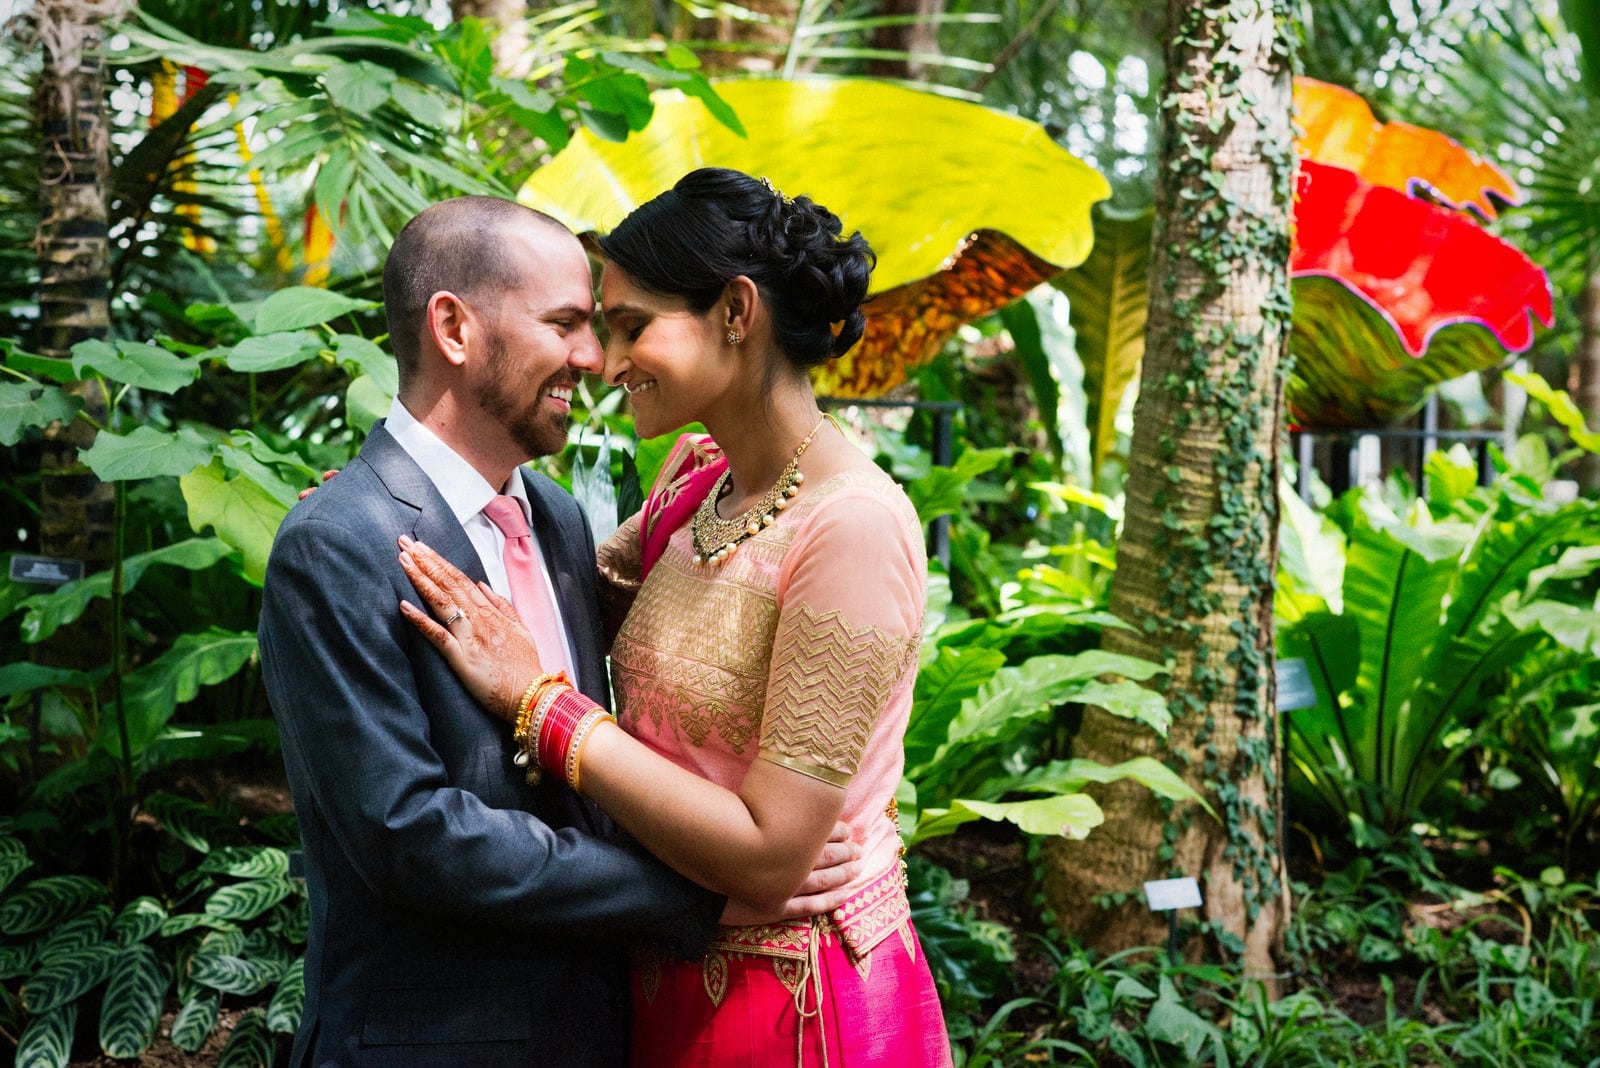 a bride dressed in a sari and groom with a grey suit and pink tie embrace in front of plants and Chihuly glass at their renaissance phipps south asian wedding